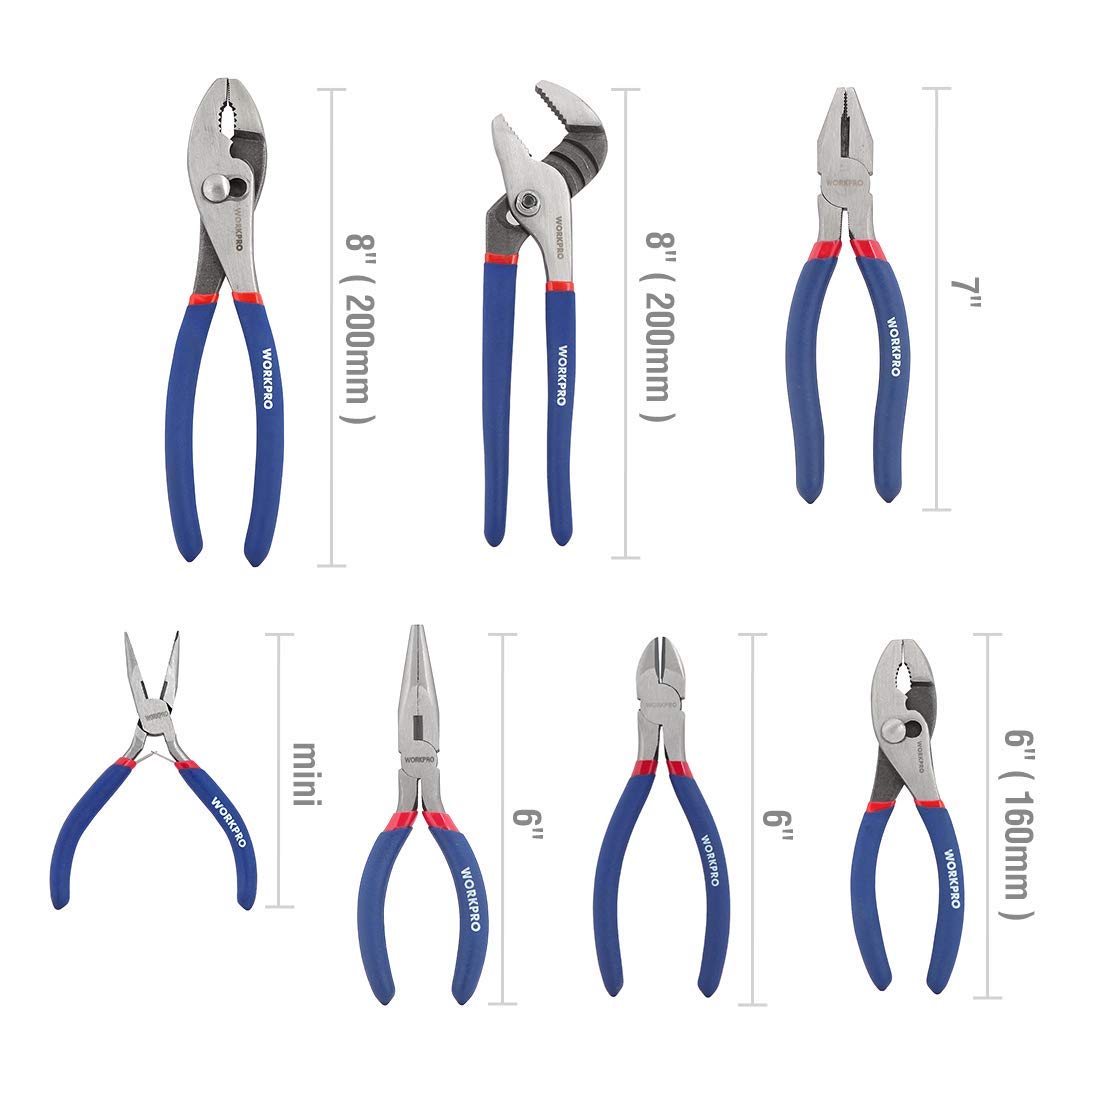 WORKPRO 7-piece Pliers Set and 3-piece Locking Pliers Set combo